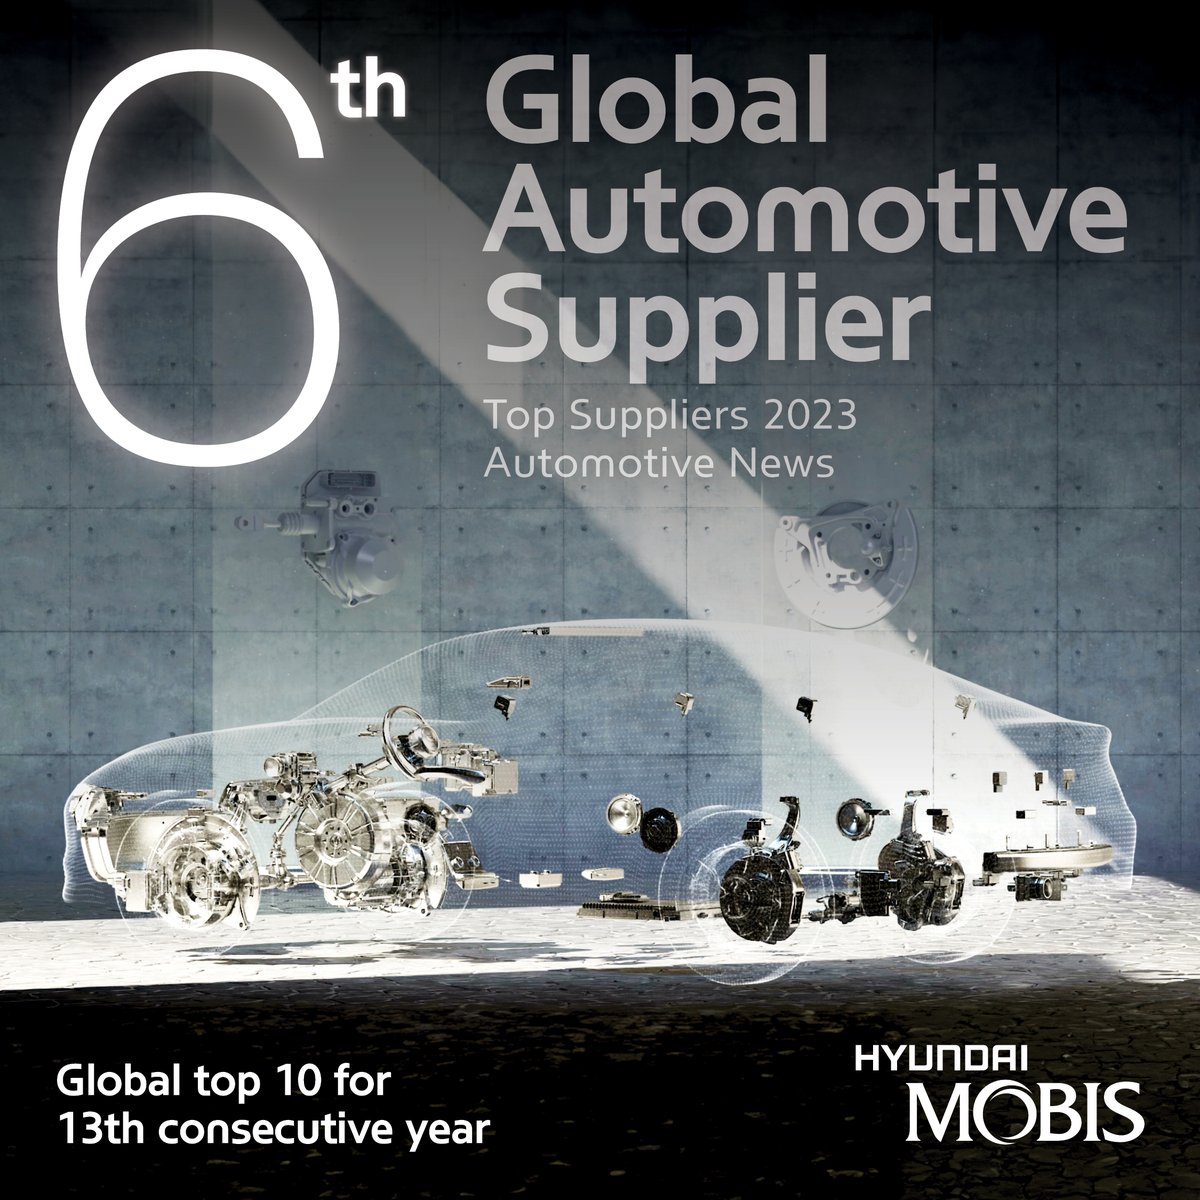 We’ve once again claimed 6th place on the Automotive News top 100 global suppliers list, indicating excellence in terms of market growth, presence, innovation, and performance.

#TopSuppliers #AutomotiveNews #FutureMobility #TheOneforAllMobility #MOBIS #HyundaiMOBIS